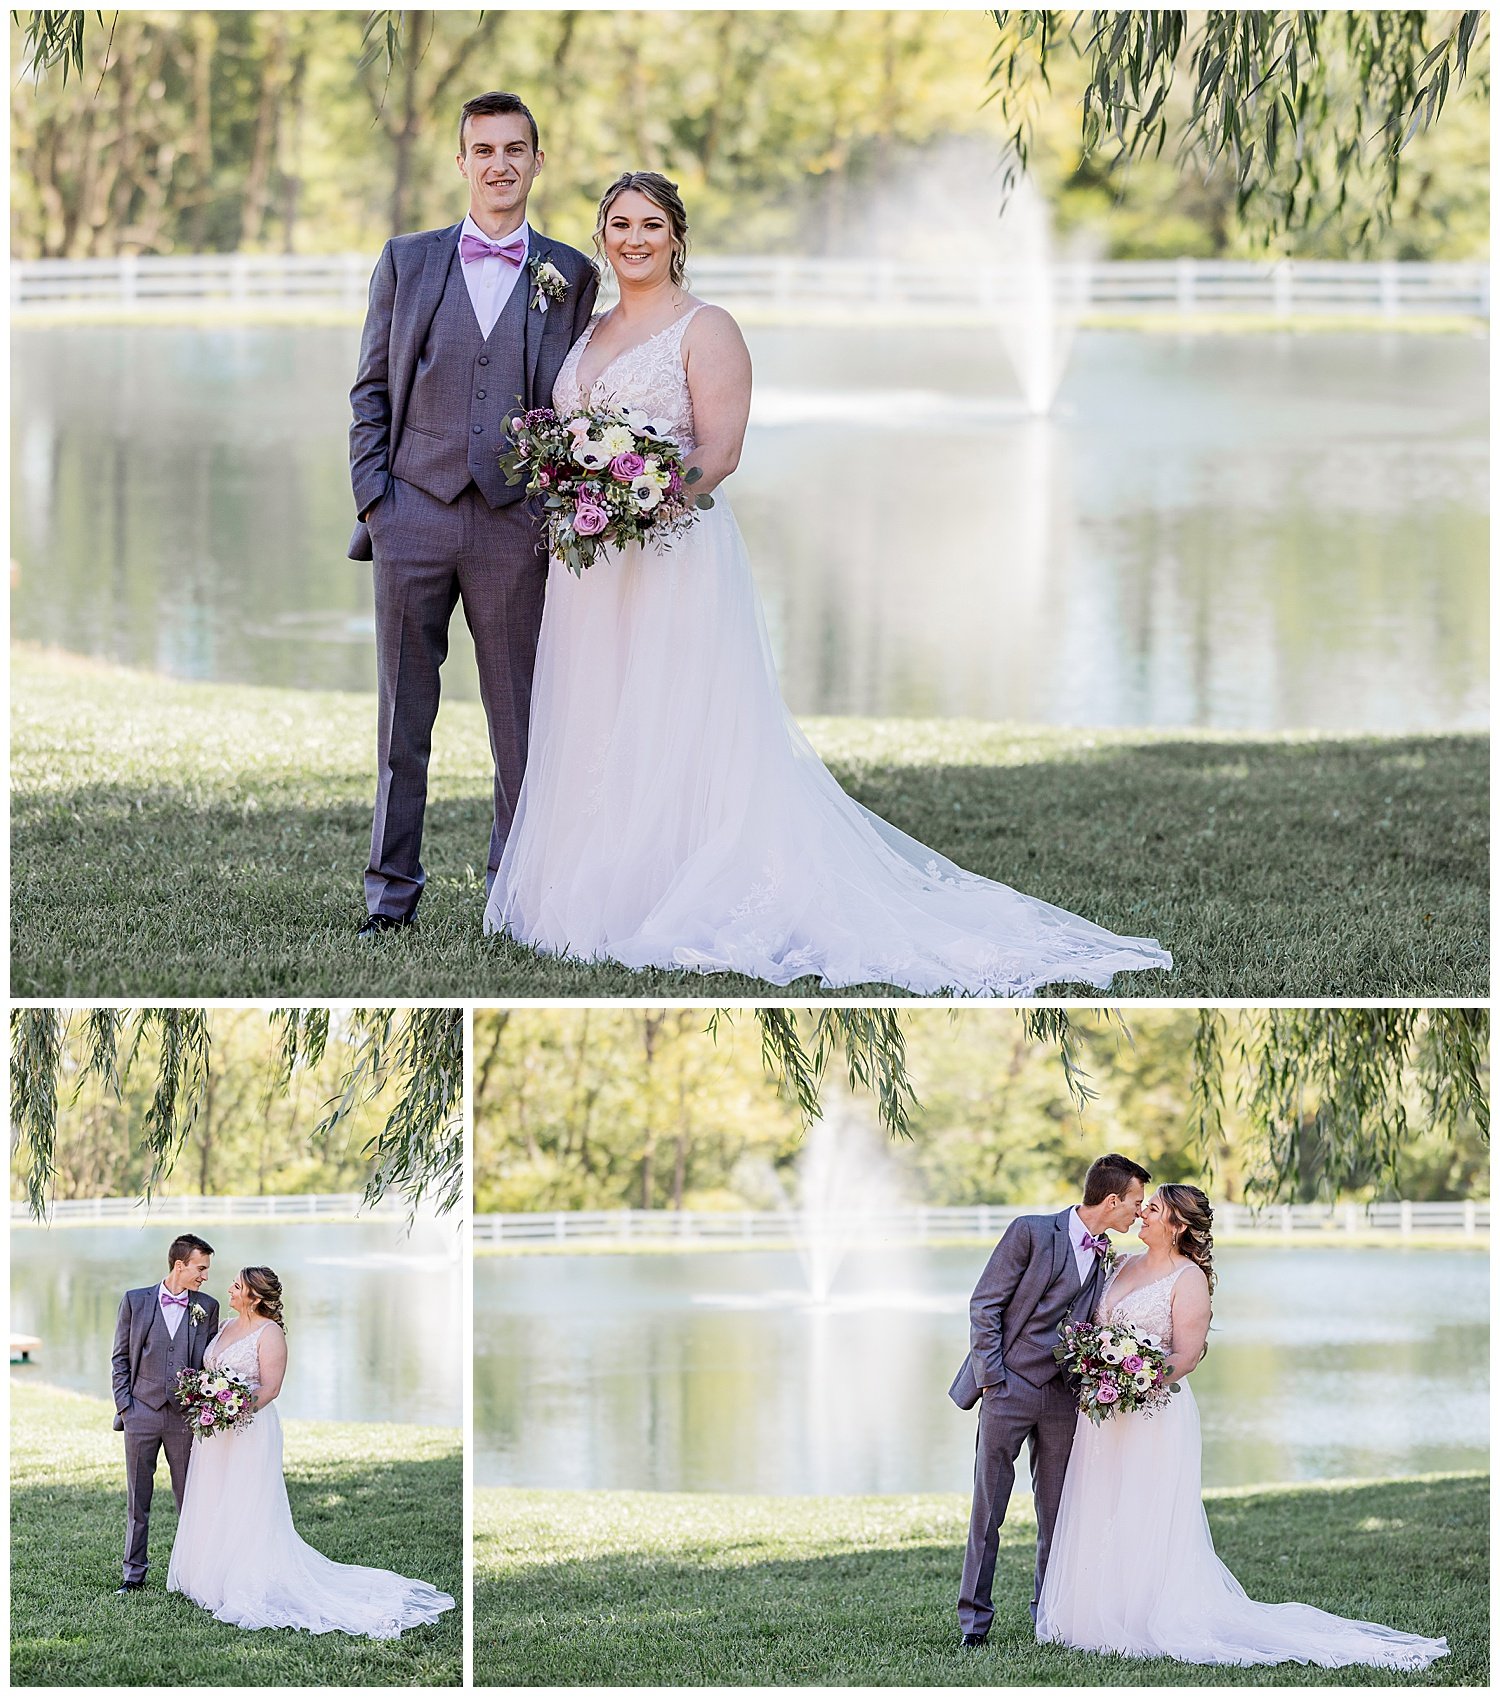 Therese Dan Married Pond View Farm Wedding Living Radiant Photography Blog_0022.jpg